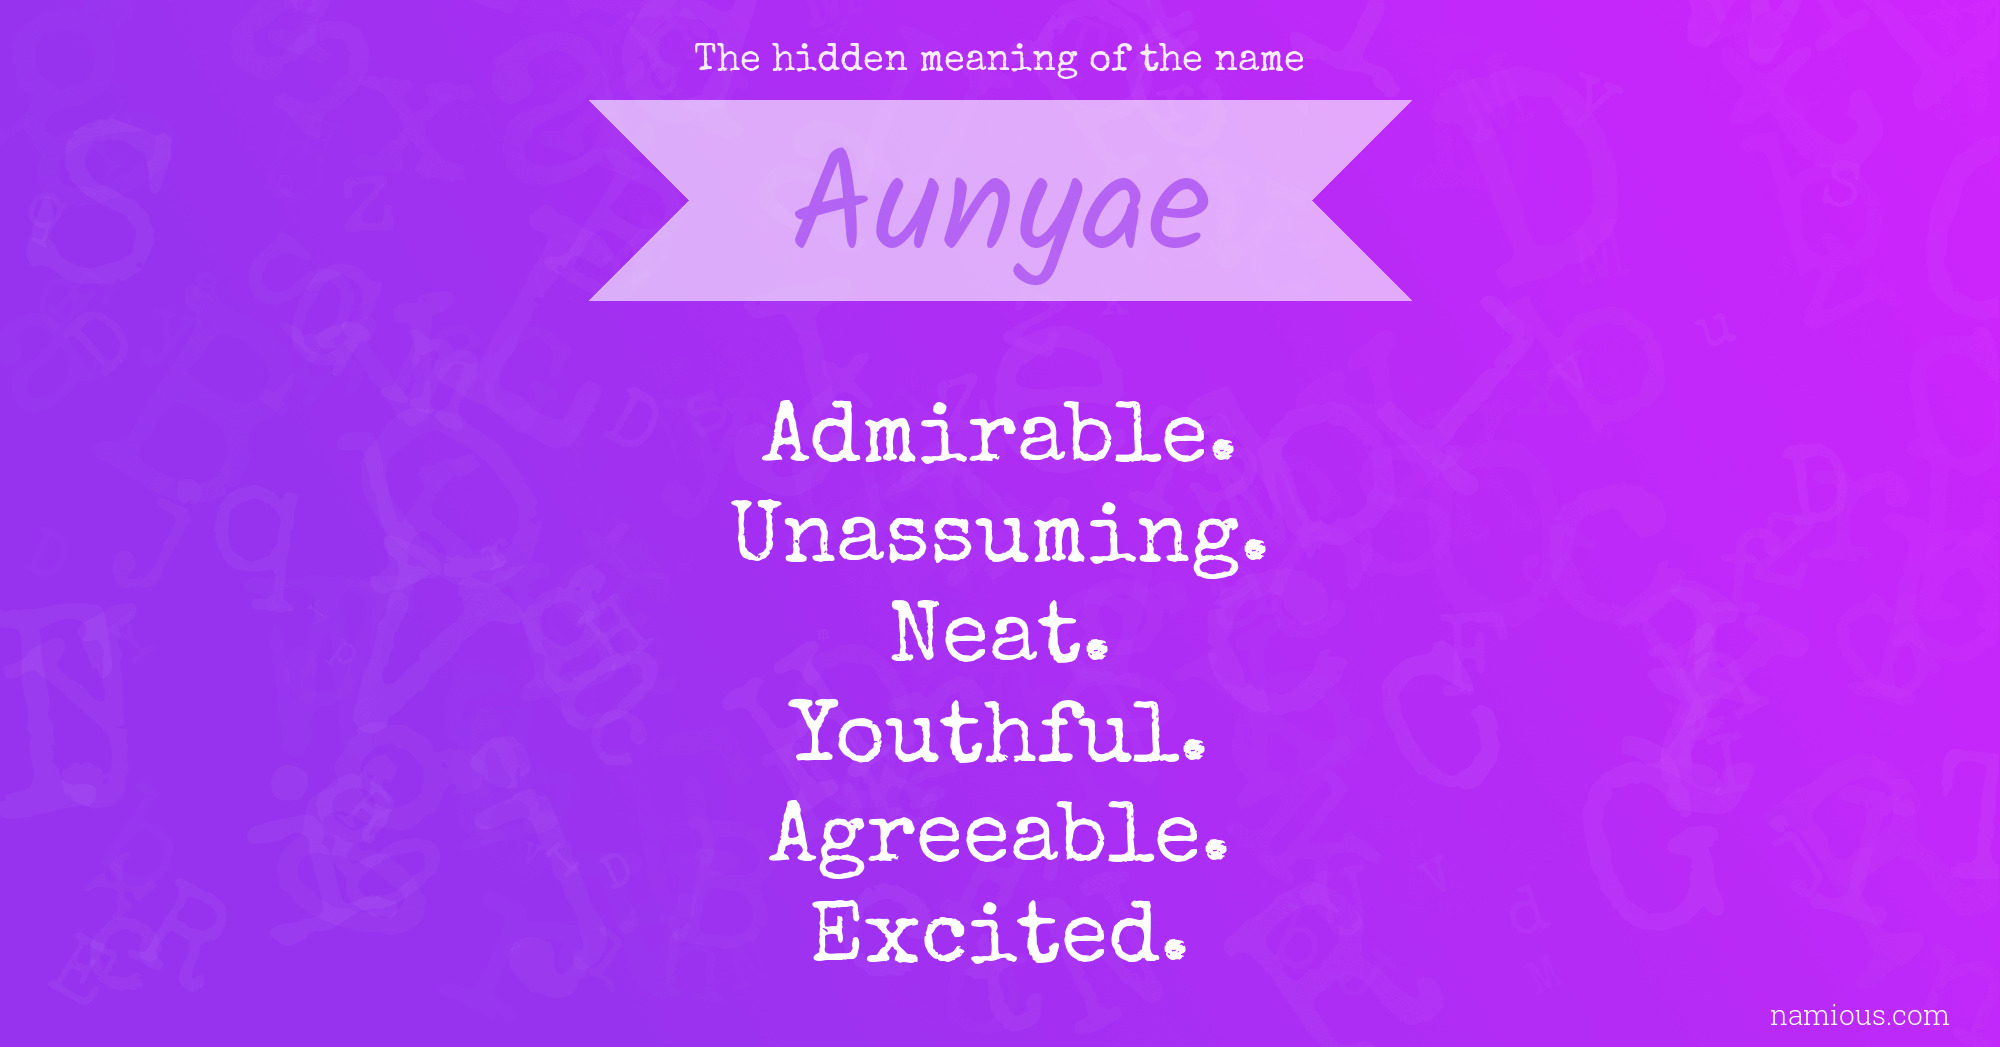 The hidden meaning of the name Aunyae